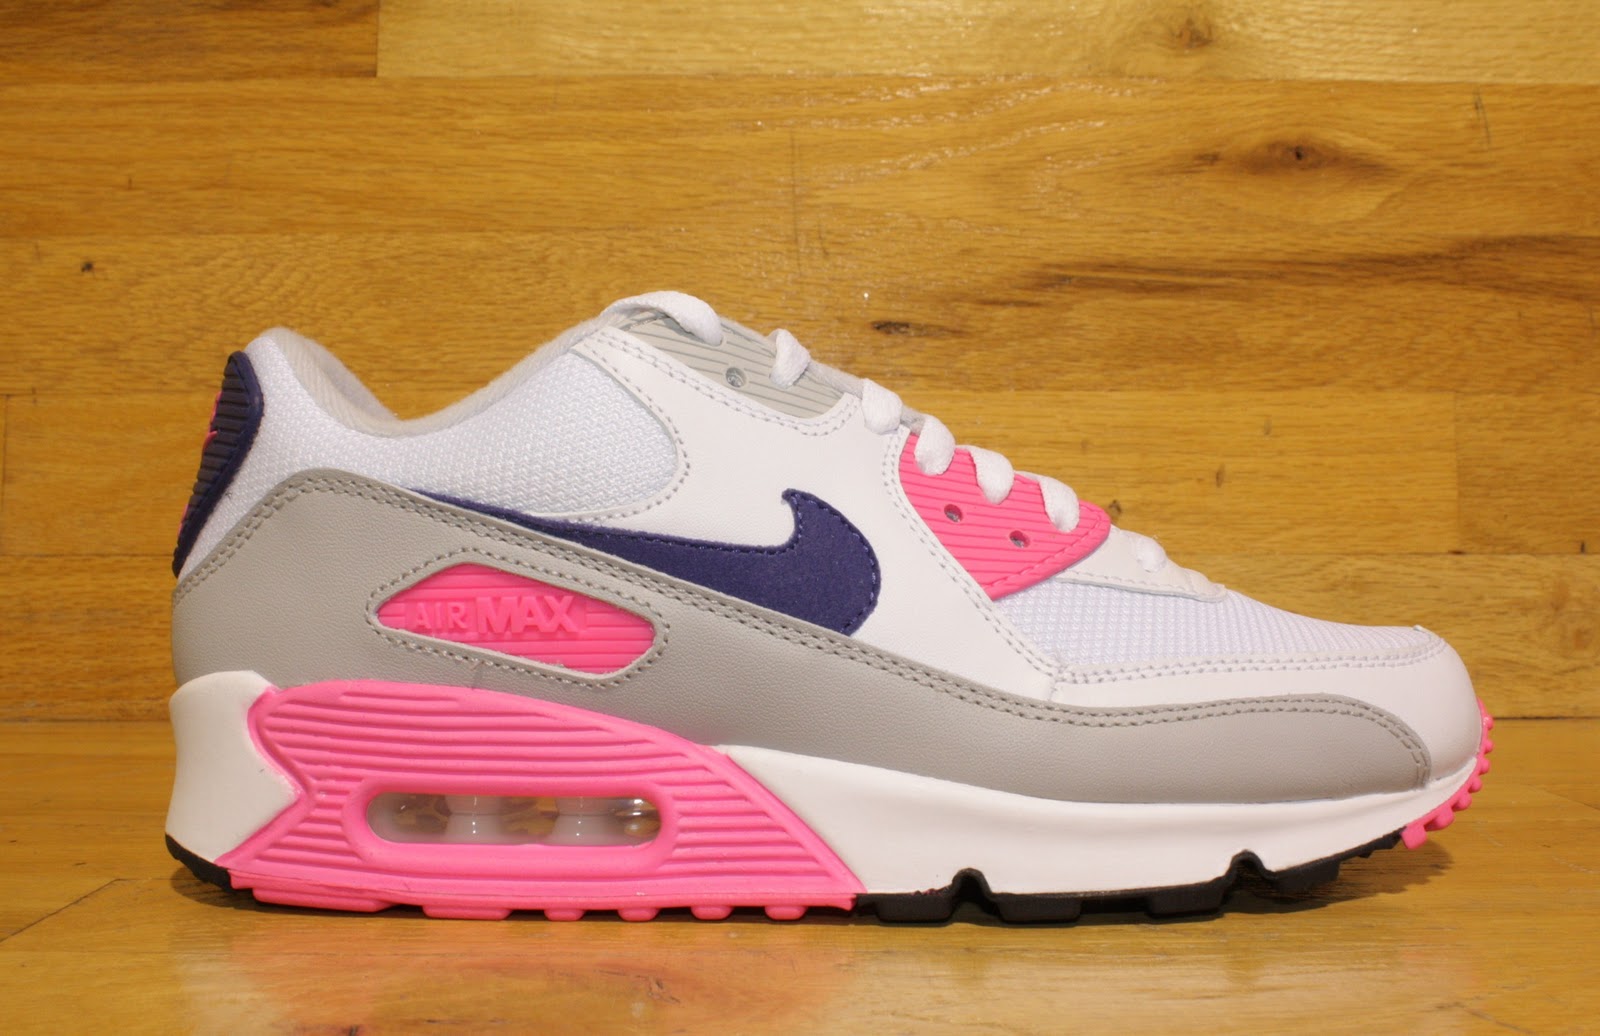 Dr. Jays Stores: Nike Air Max 90 wmns Coral/White/Silver Available In ...